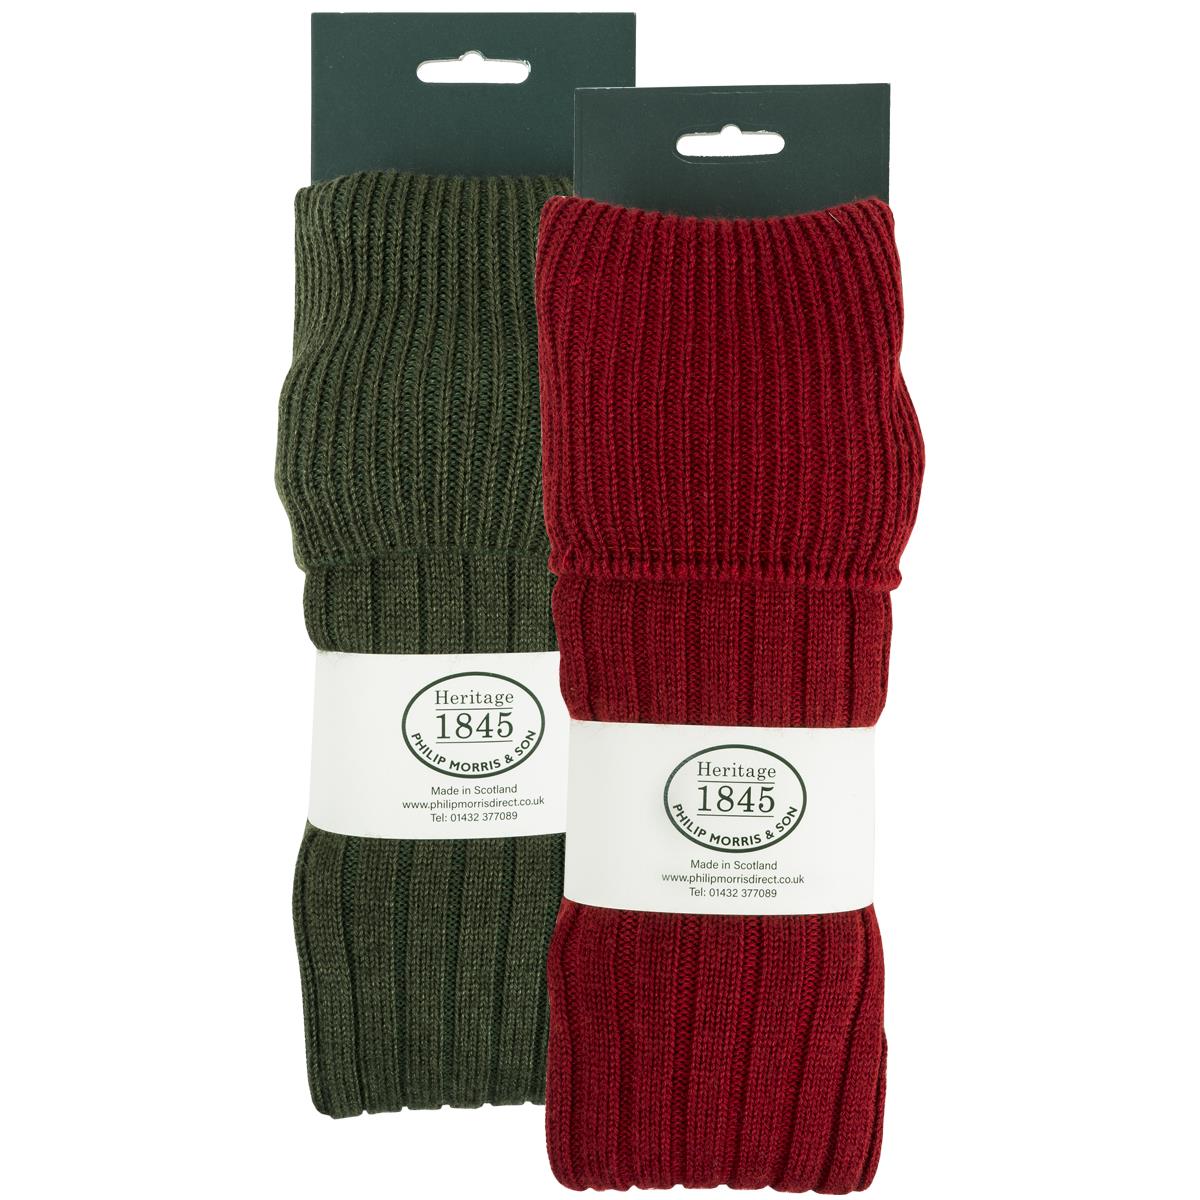 Heritage 1845 Mens Jura Classic Boot Sock Twin Pack Spruce/ Brick Red 7-11